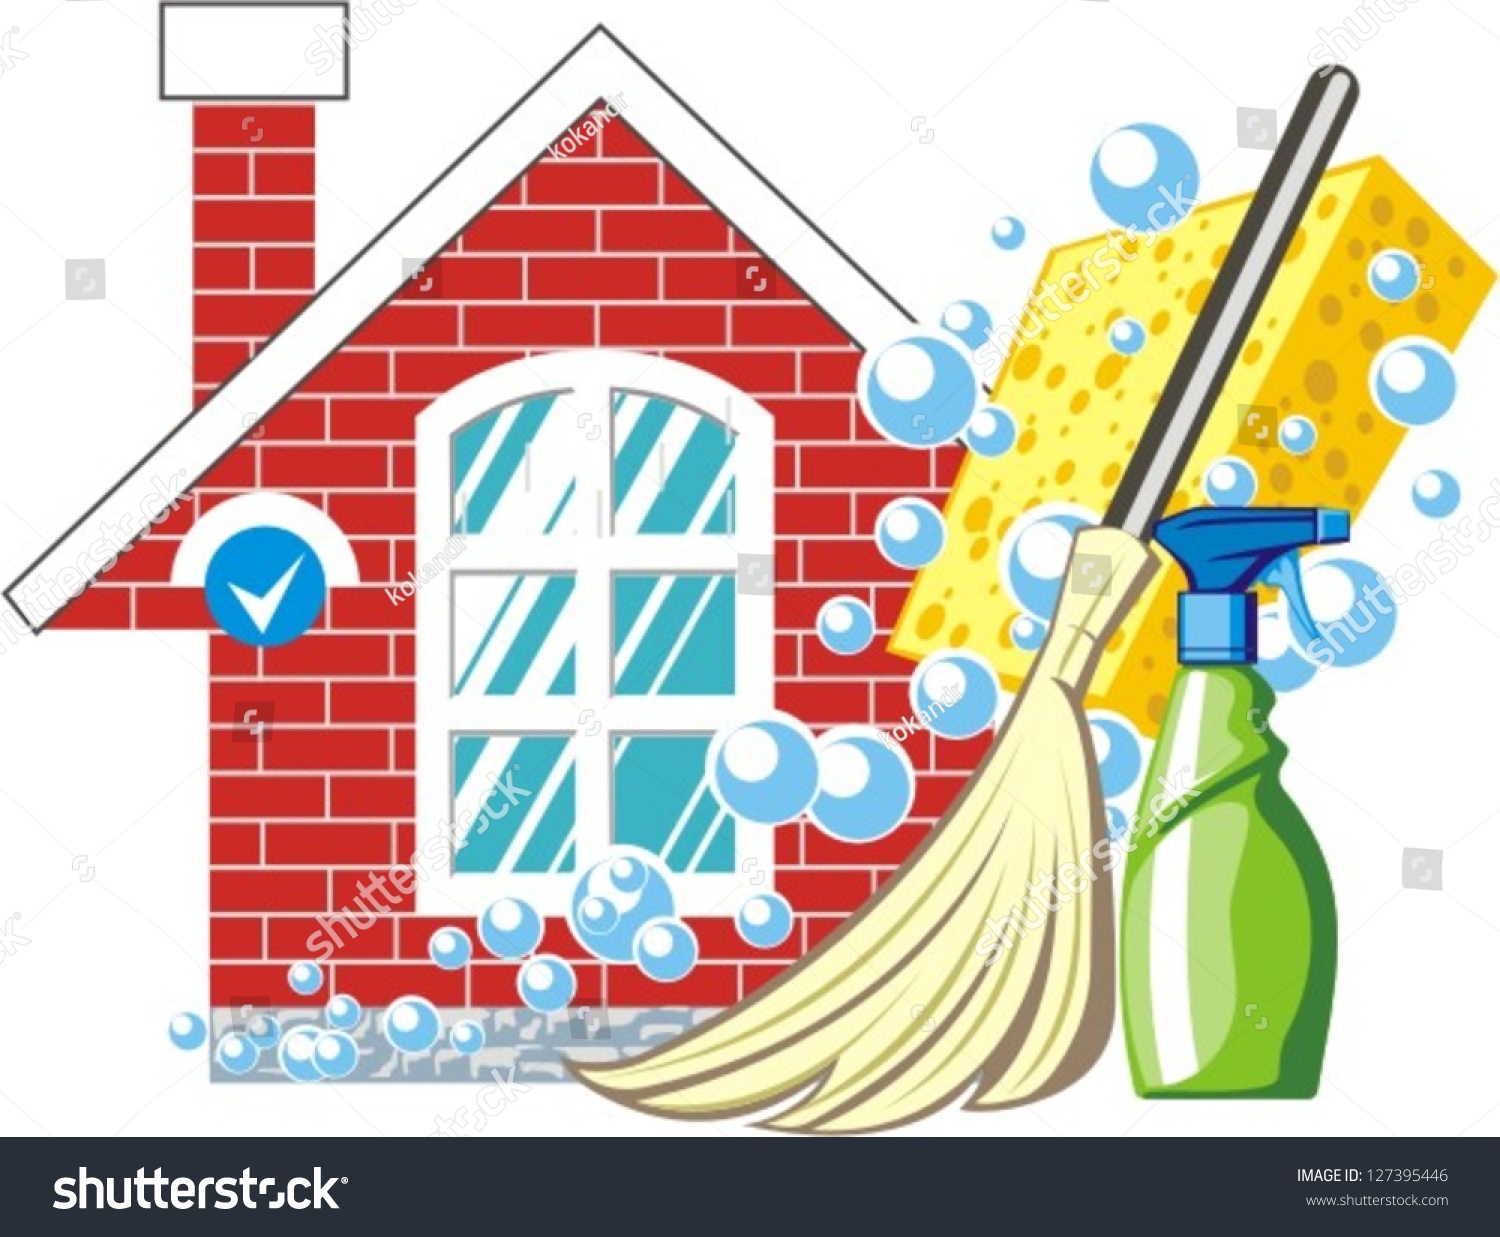 clipart house cleaning business - photo #26